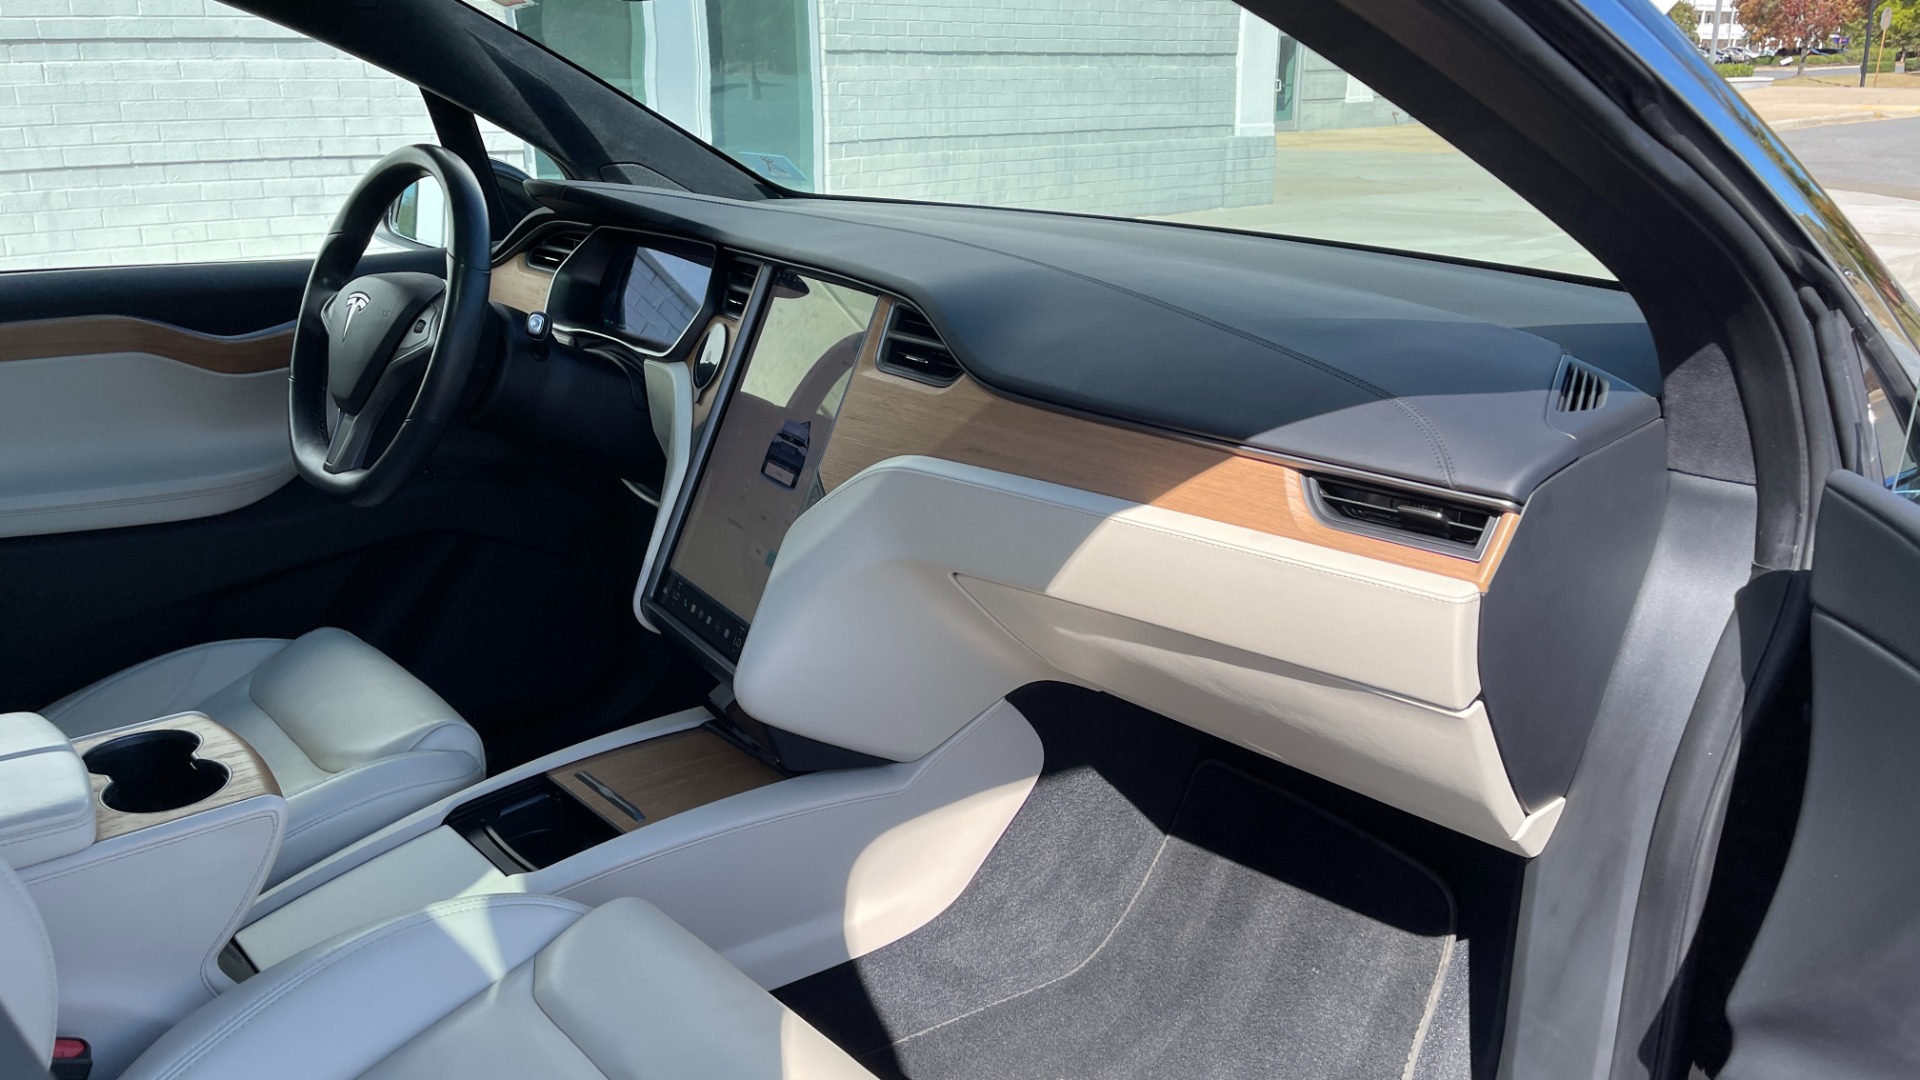 Used 2020 Tesla Model X LONG RANGE PLUS / FULL SELF DRIVING / 22IN WHEELS / 3 ROW SEATING for sale $82,999 at Formula Imports in Charlotte NC 28227 24